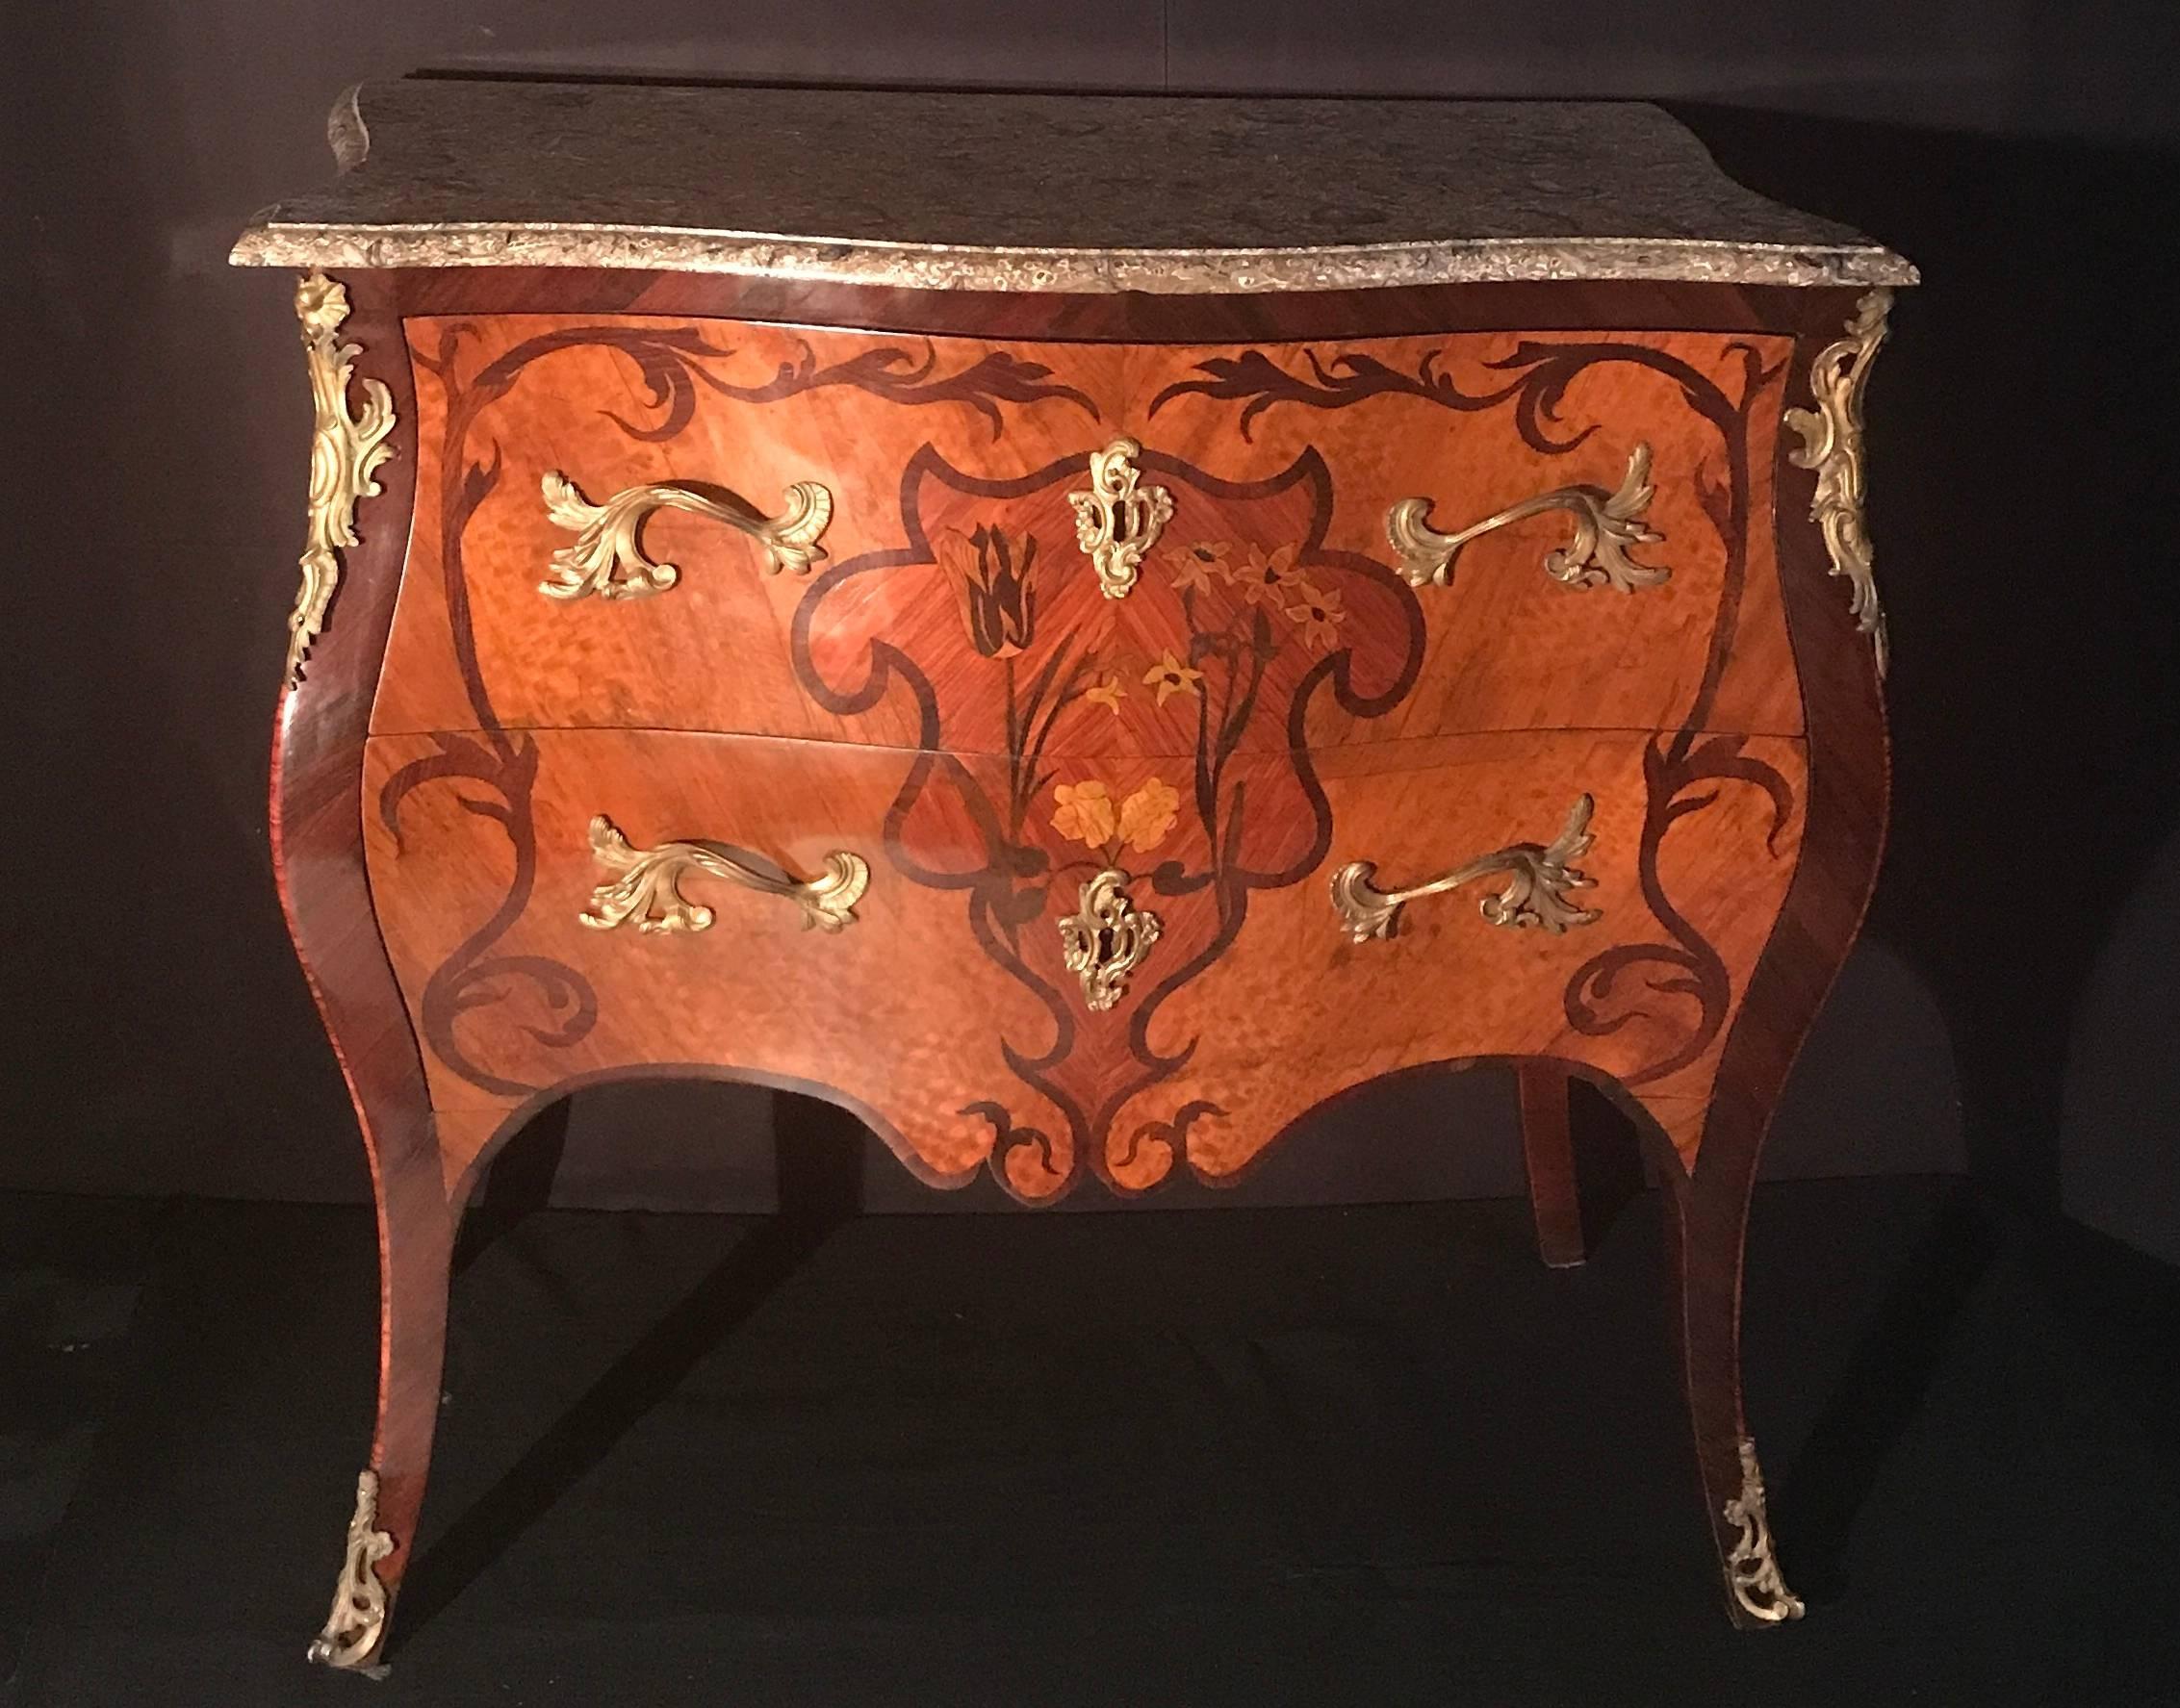 With 'Lumachella' marble-top above two drawers decorated sans travers and ormolu mounts.
Fine detailed floral inlay with various noble woods. Finely chiseled and gild original bronze fittings.